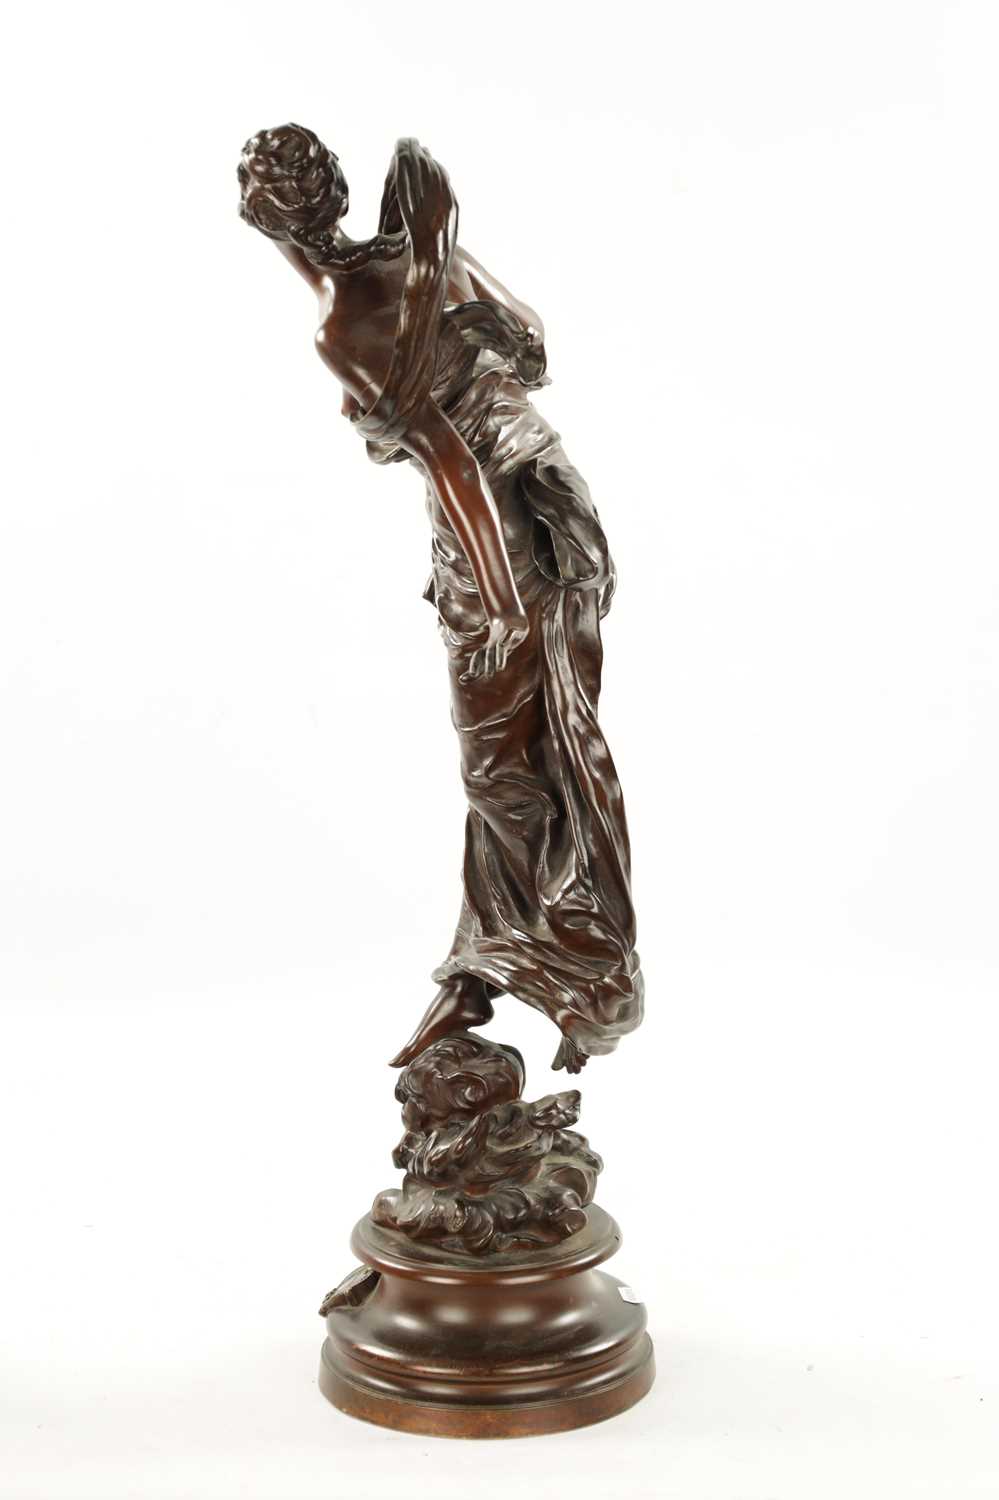 JEAN-JULES CAMBOS (1828-1885). A FINE 19TH CENTURY BROWN PATINATED BRONZE SCULPTURE OF A YOUNG LADY - Image 6 of 7